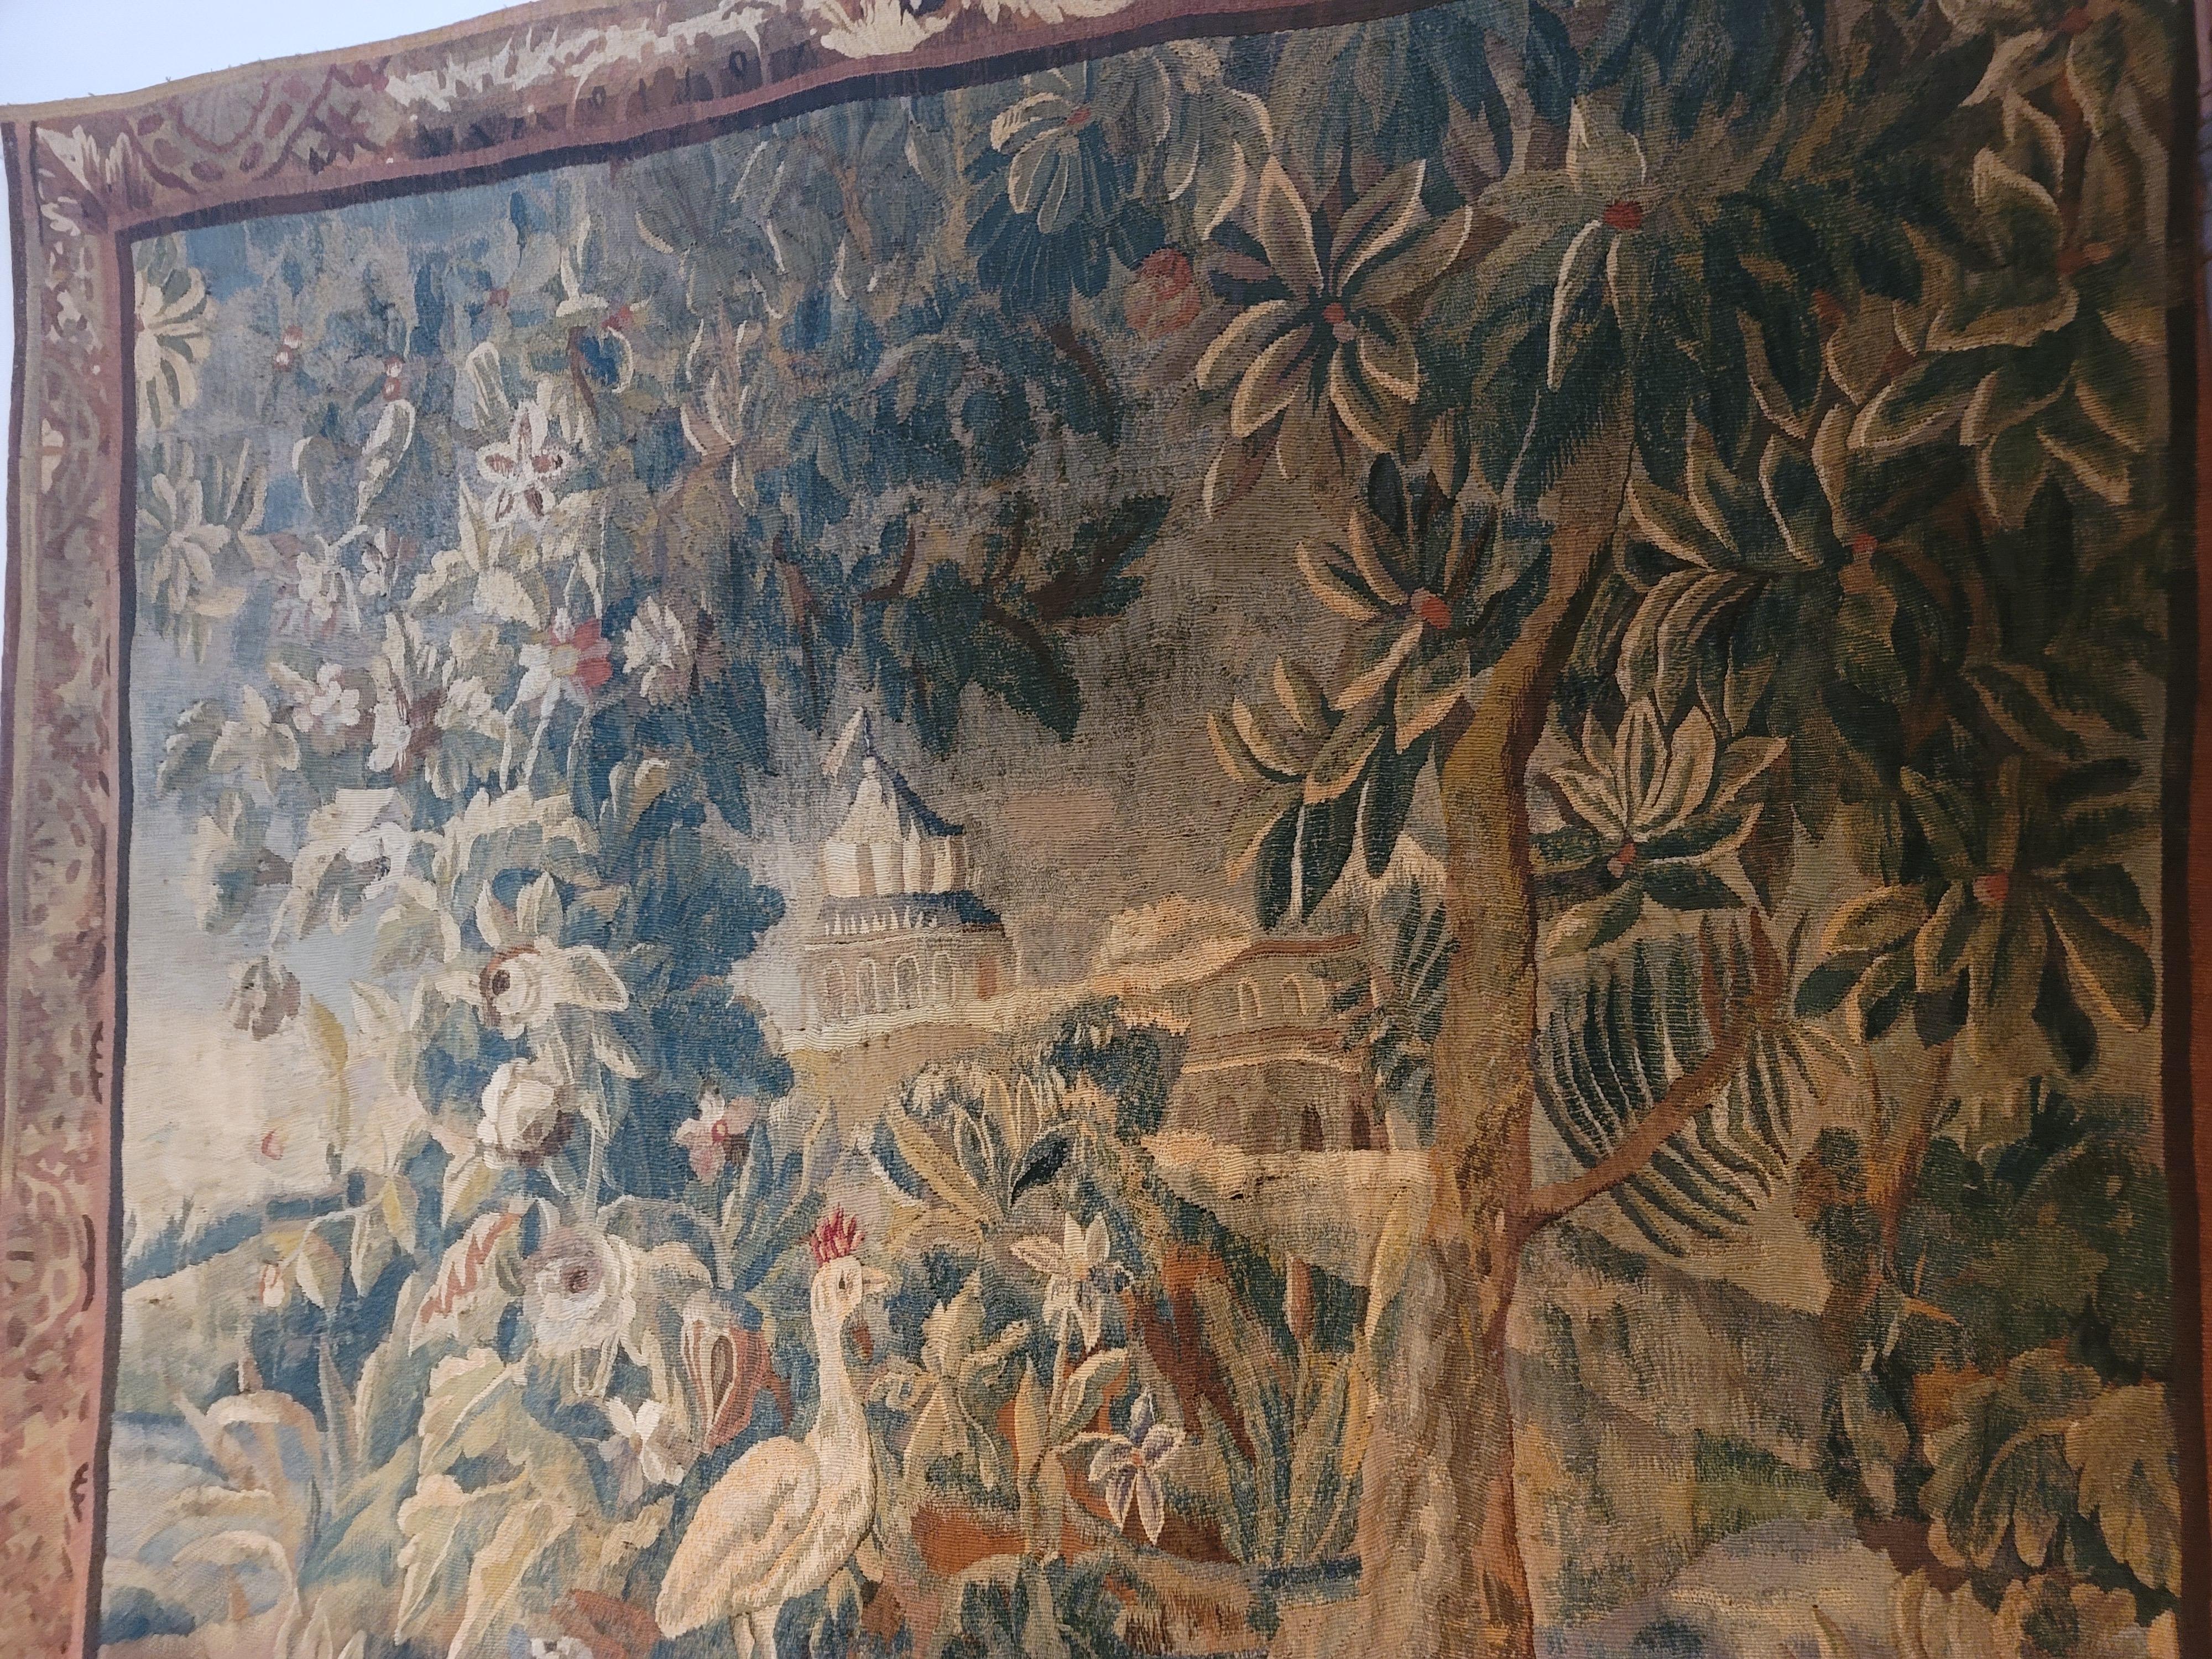 This magnificent tapestry, woven in wools and silks, showcases a captivating wooded lakeside landscape with birds taking center stage. The brown and cream slips, along with a floral and foliage border, beautifully complement the intricate design.